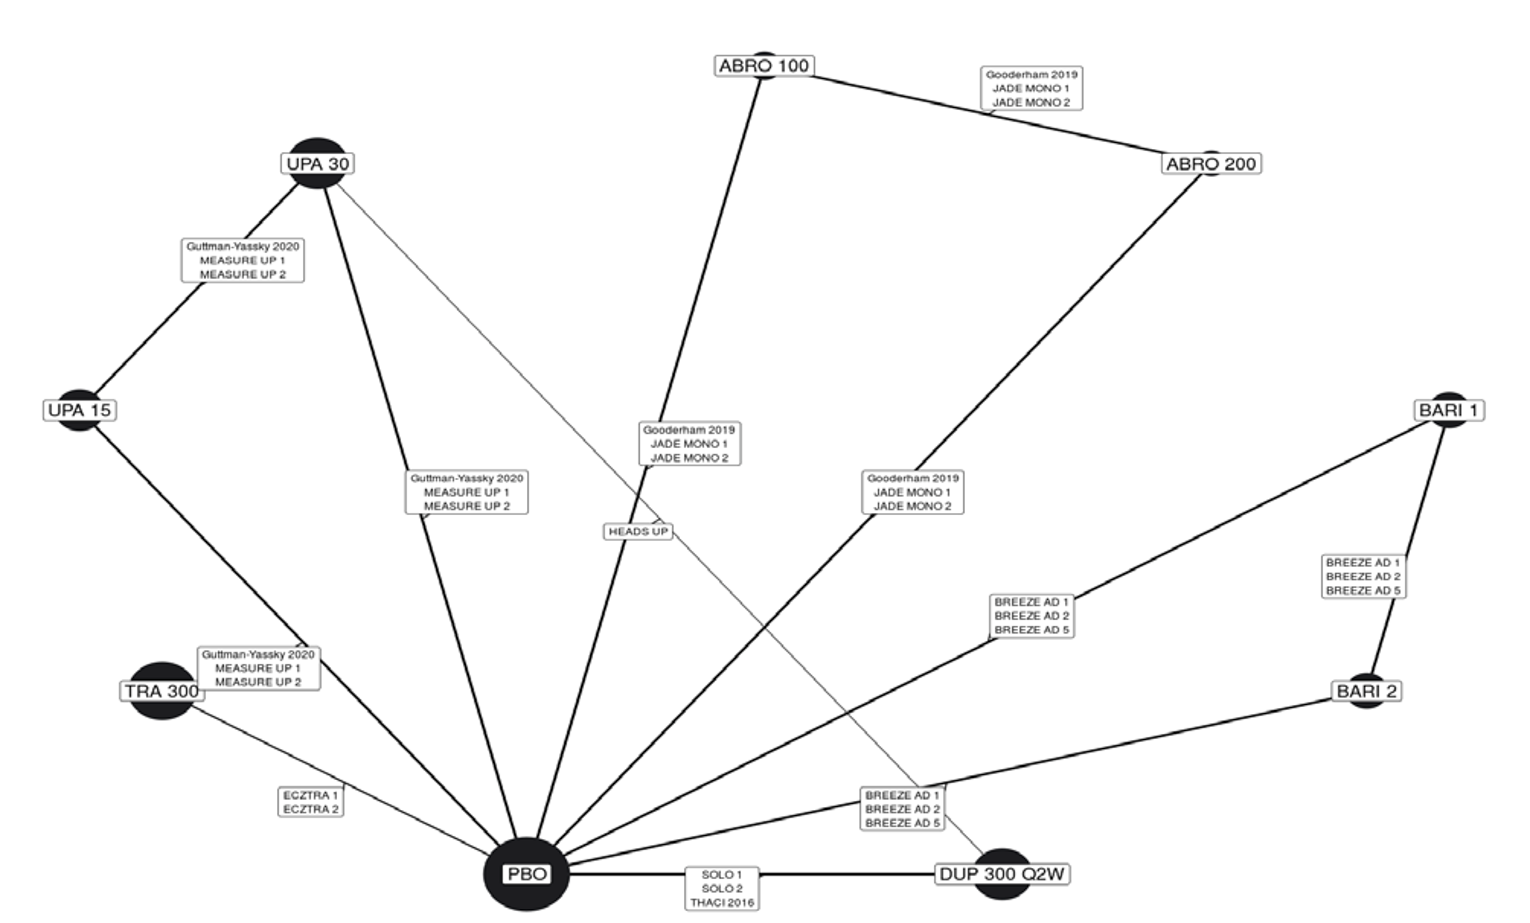 Evidence network diagram for monotherapy trials in the ICER network meta-analysis.